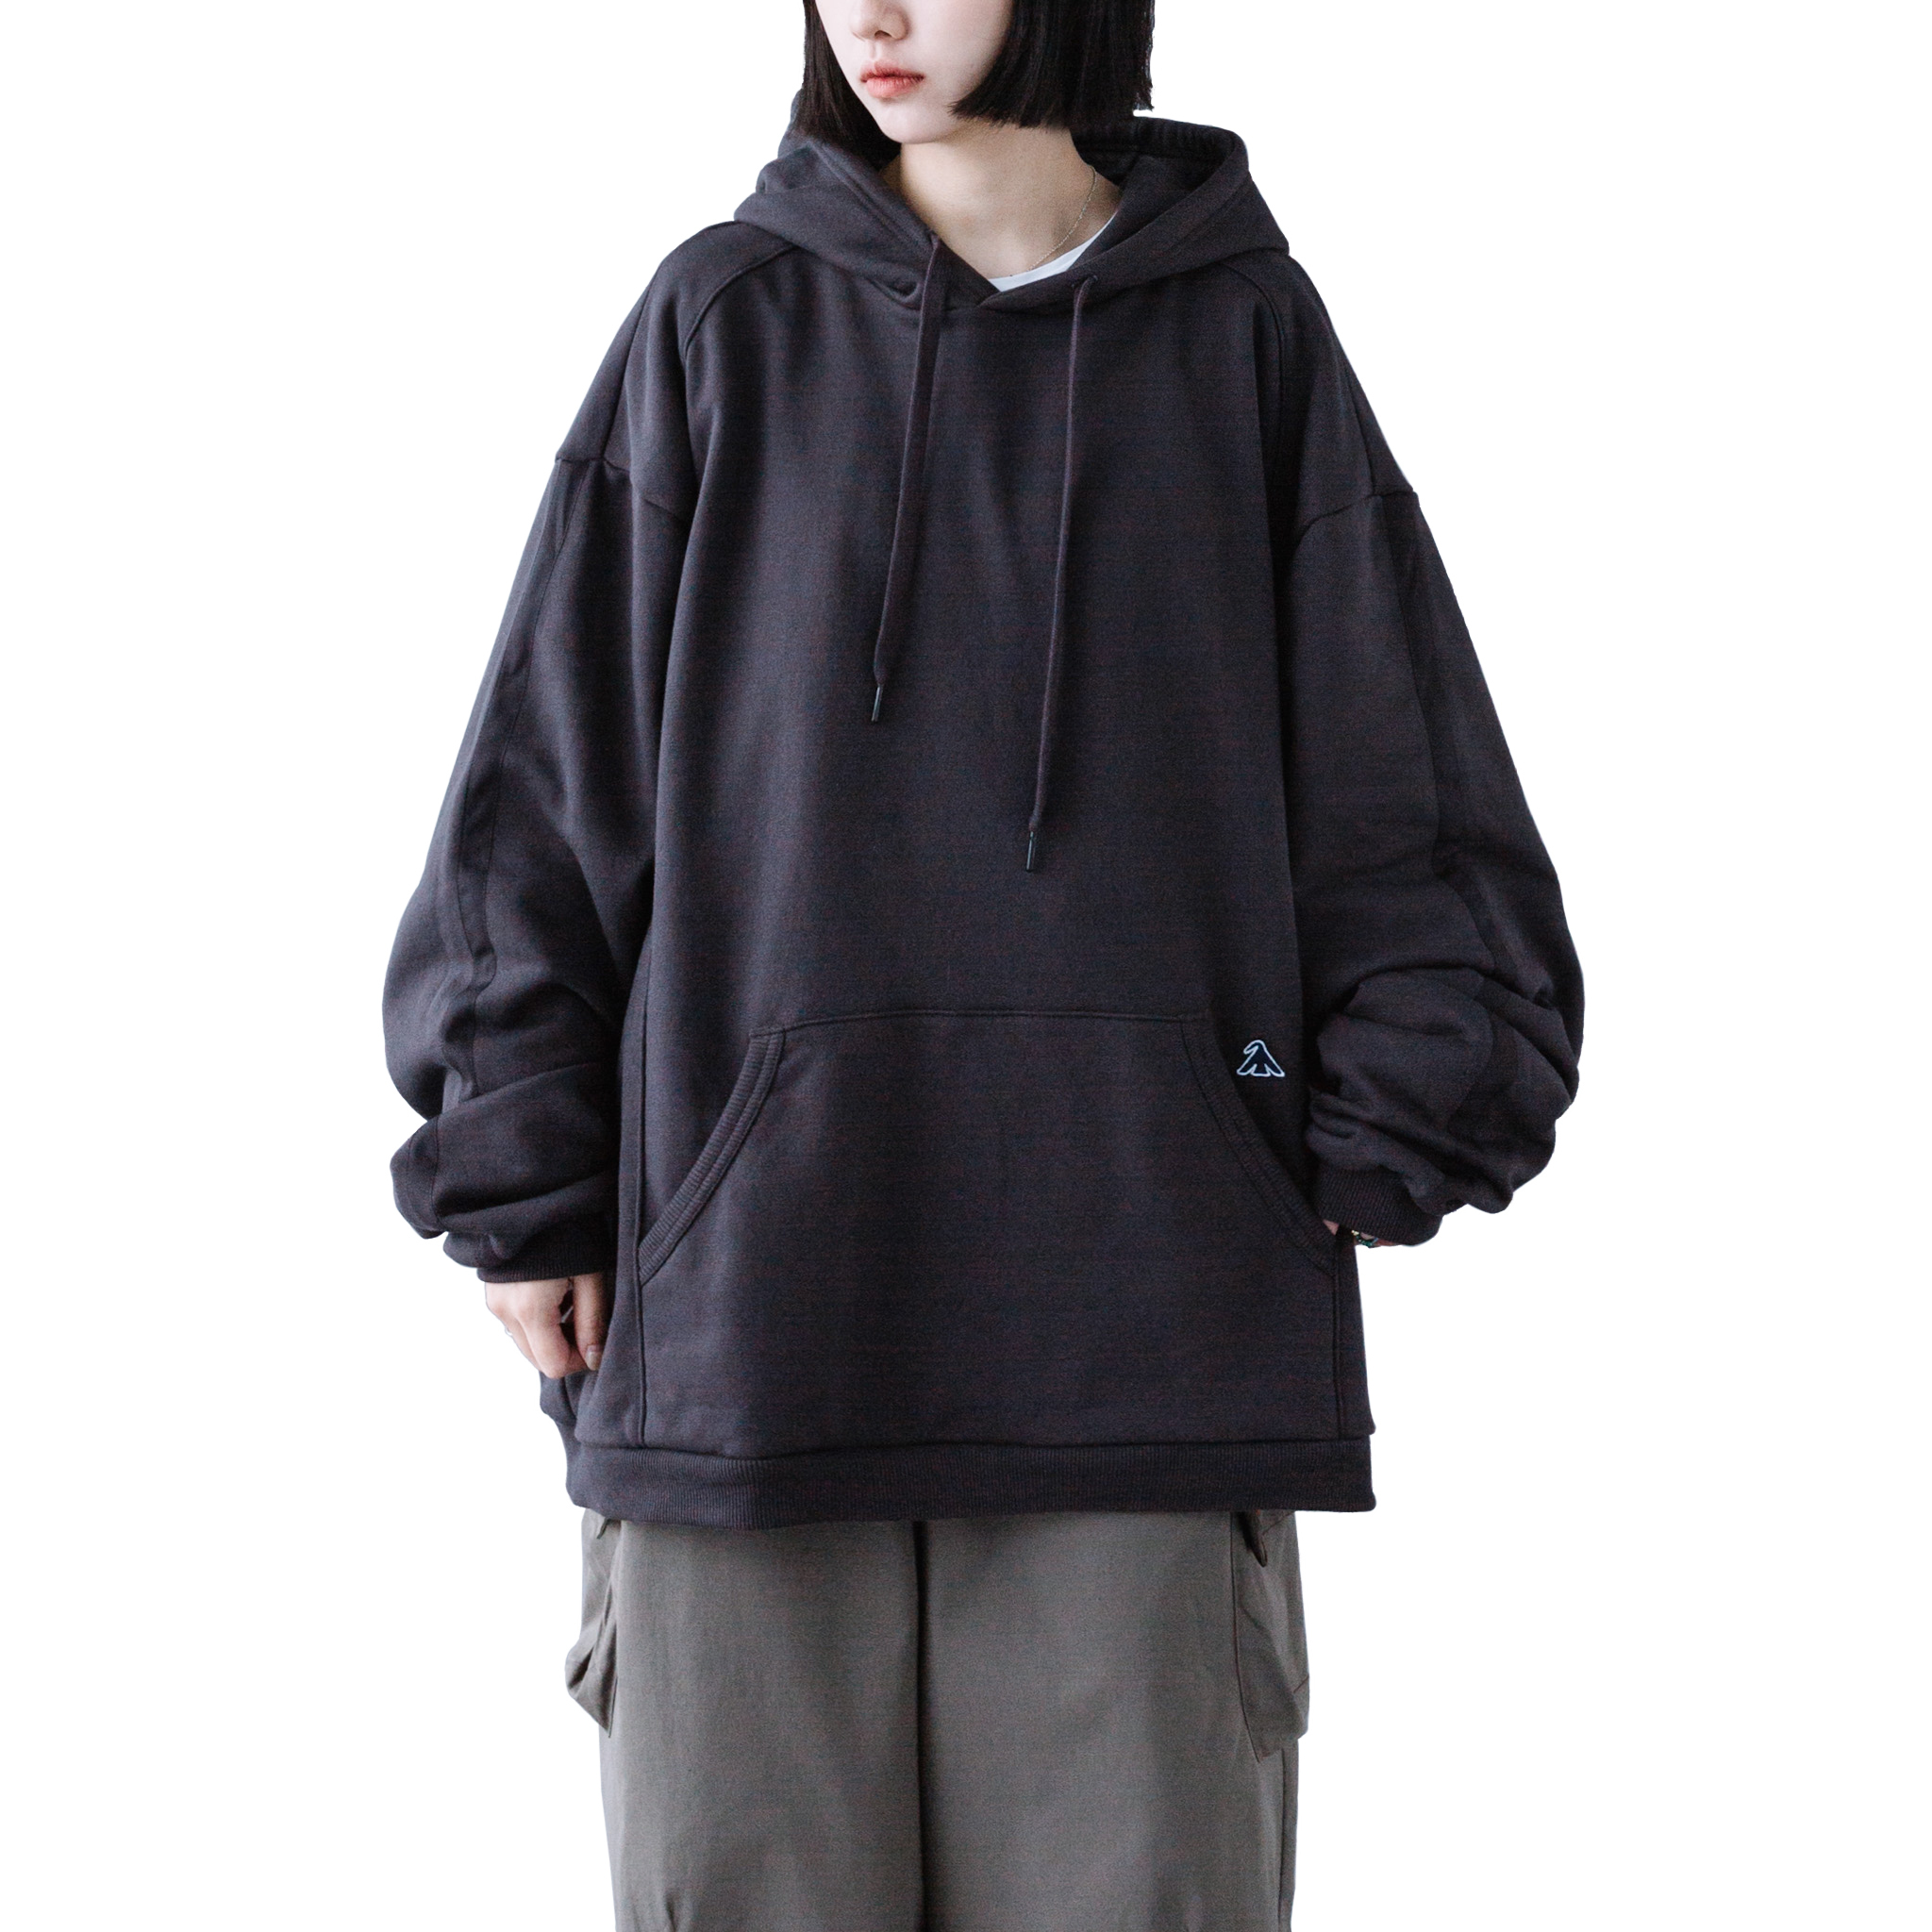 MELSIGN - Oversized Strap Hoodie - C-Brown